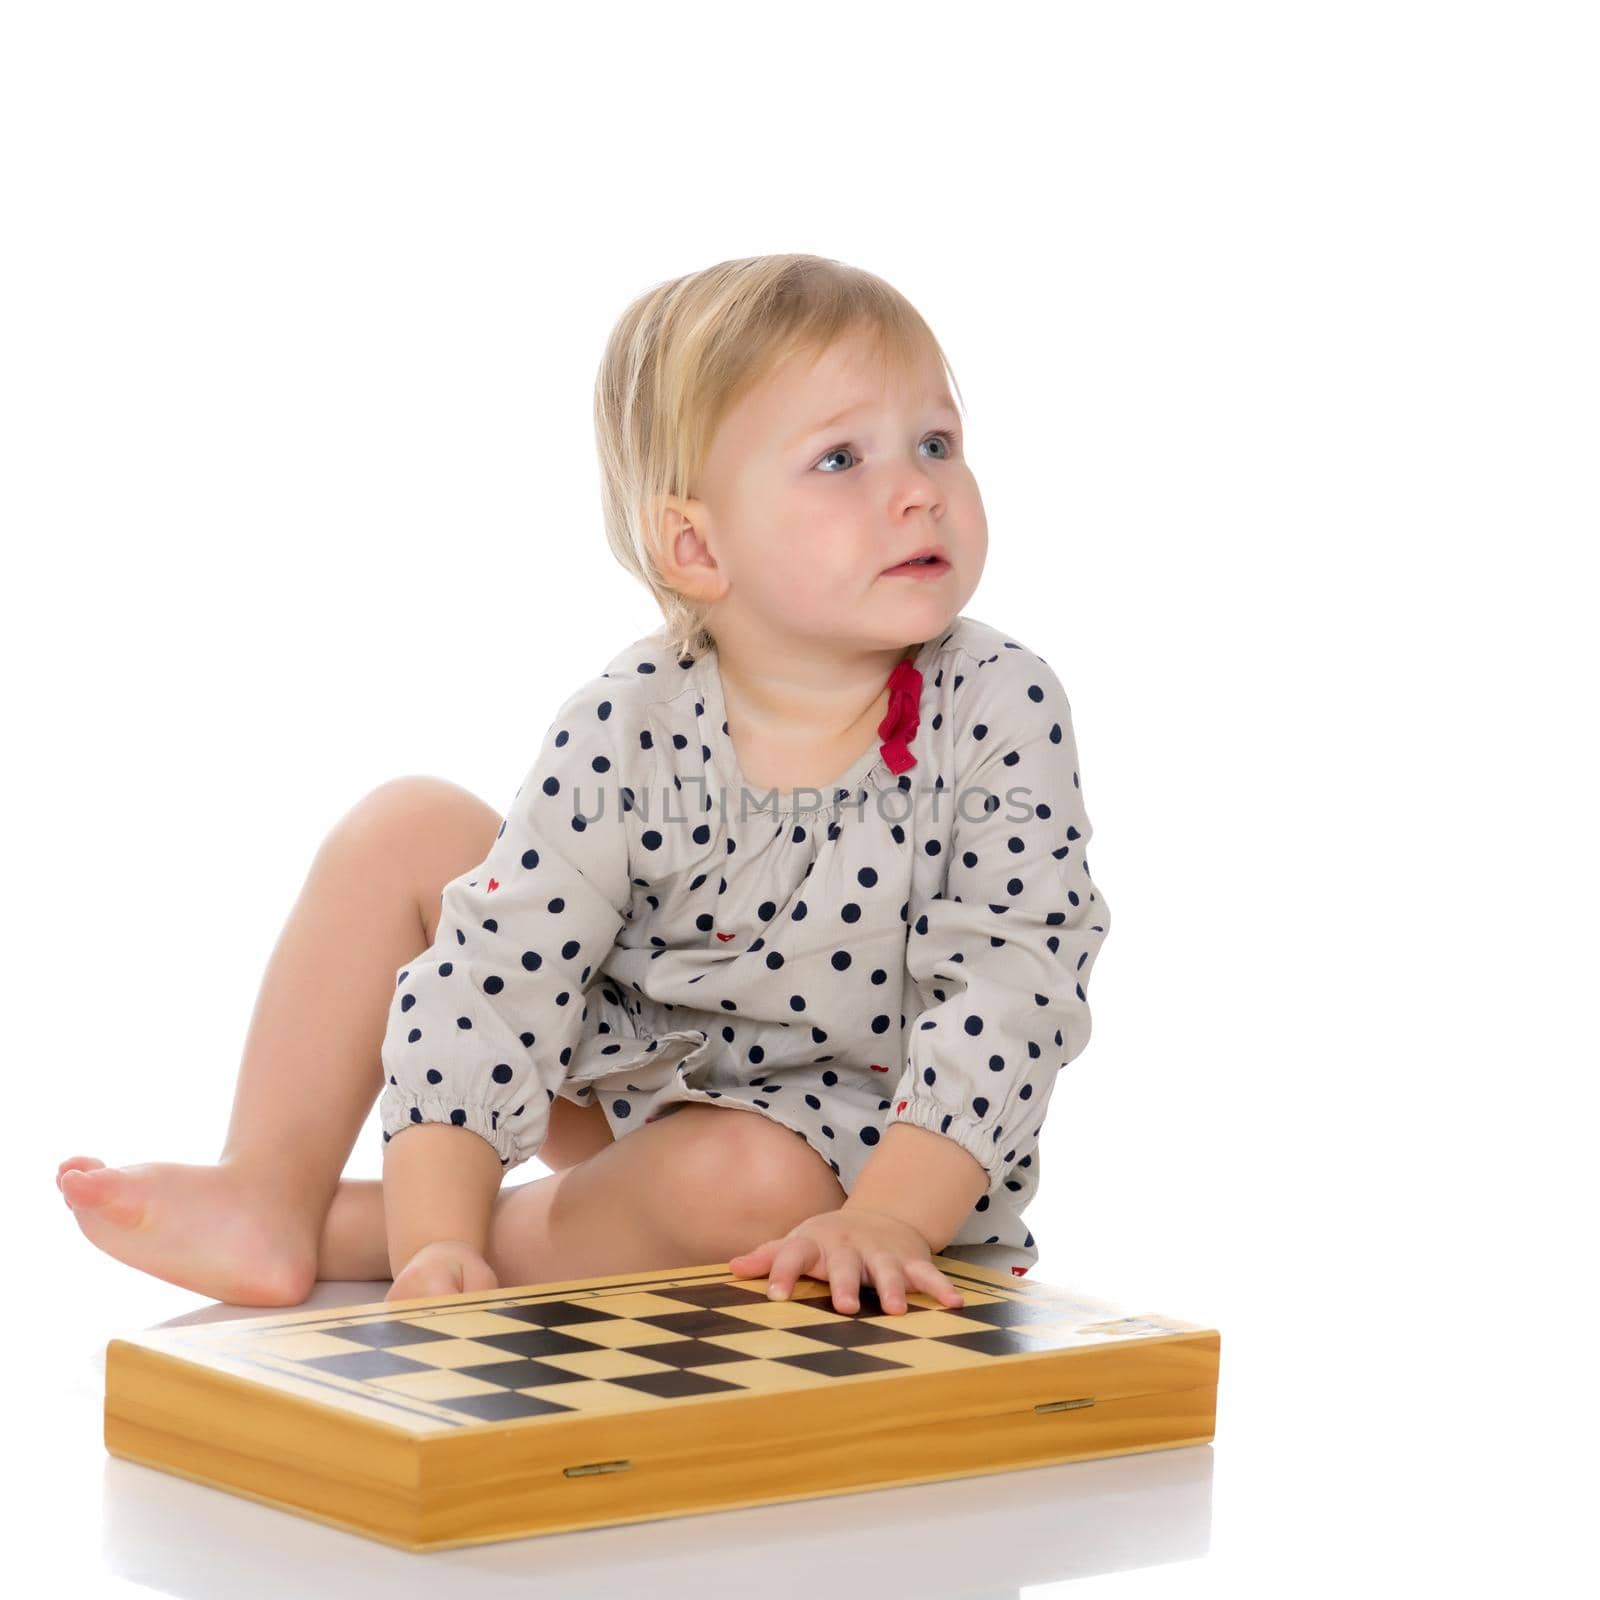 A little girl is playing chess. The concept of creative education of a child, training of thinking. Isolated on white background